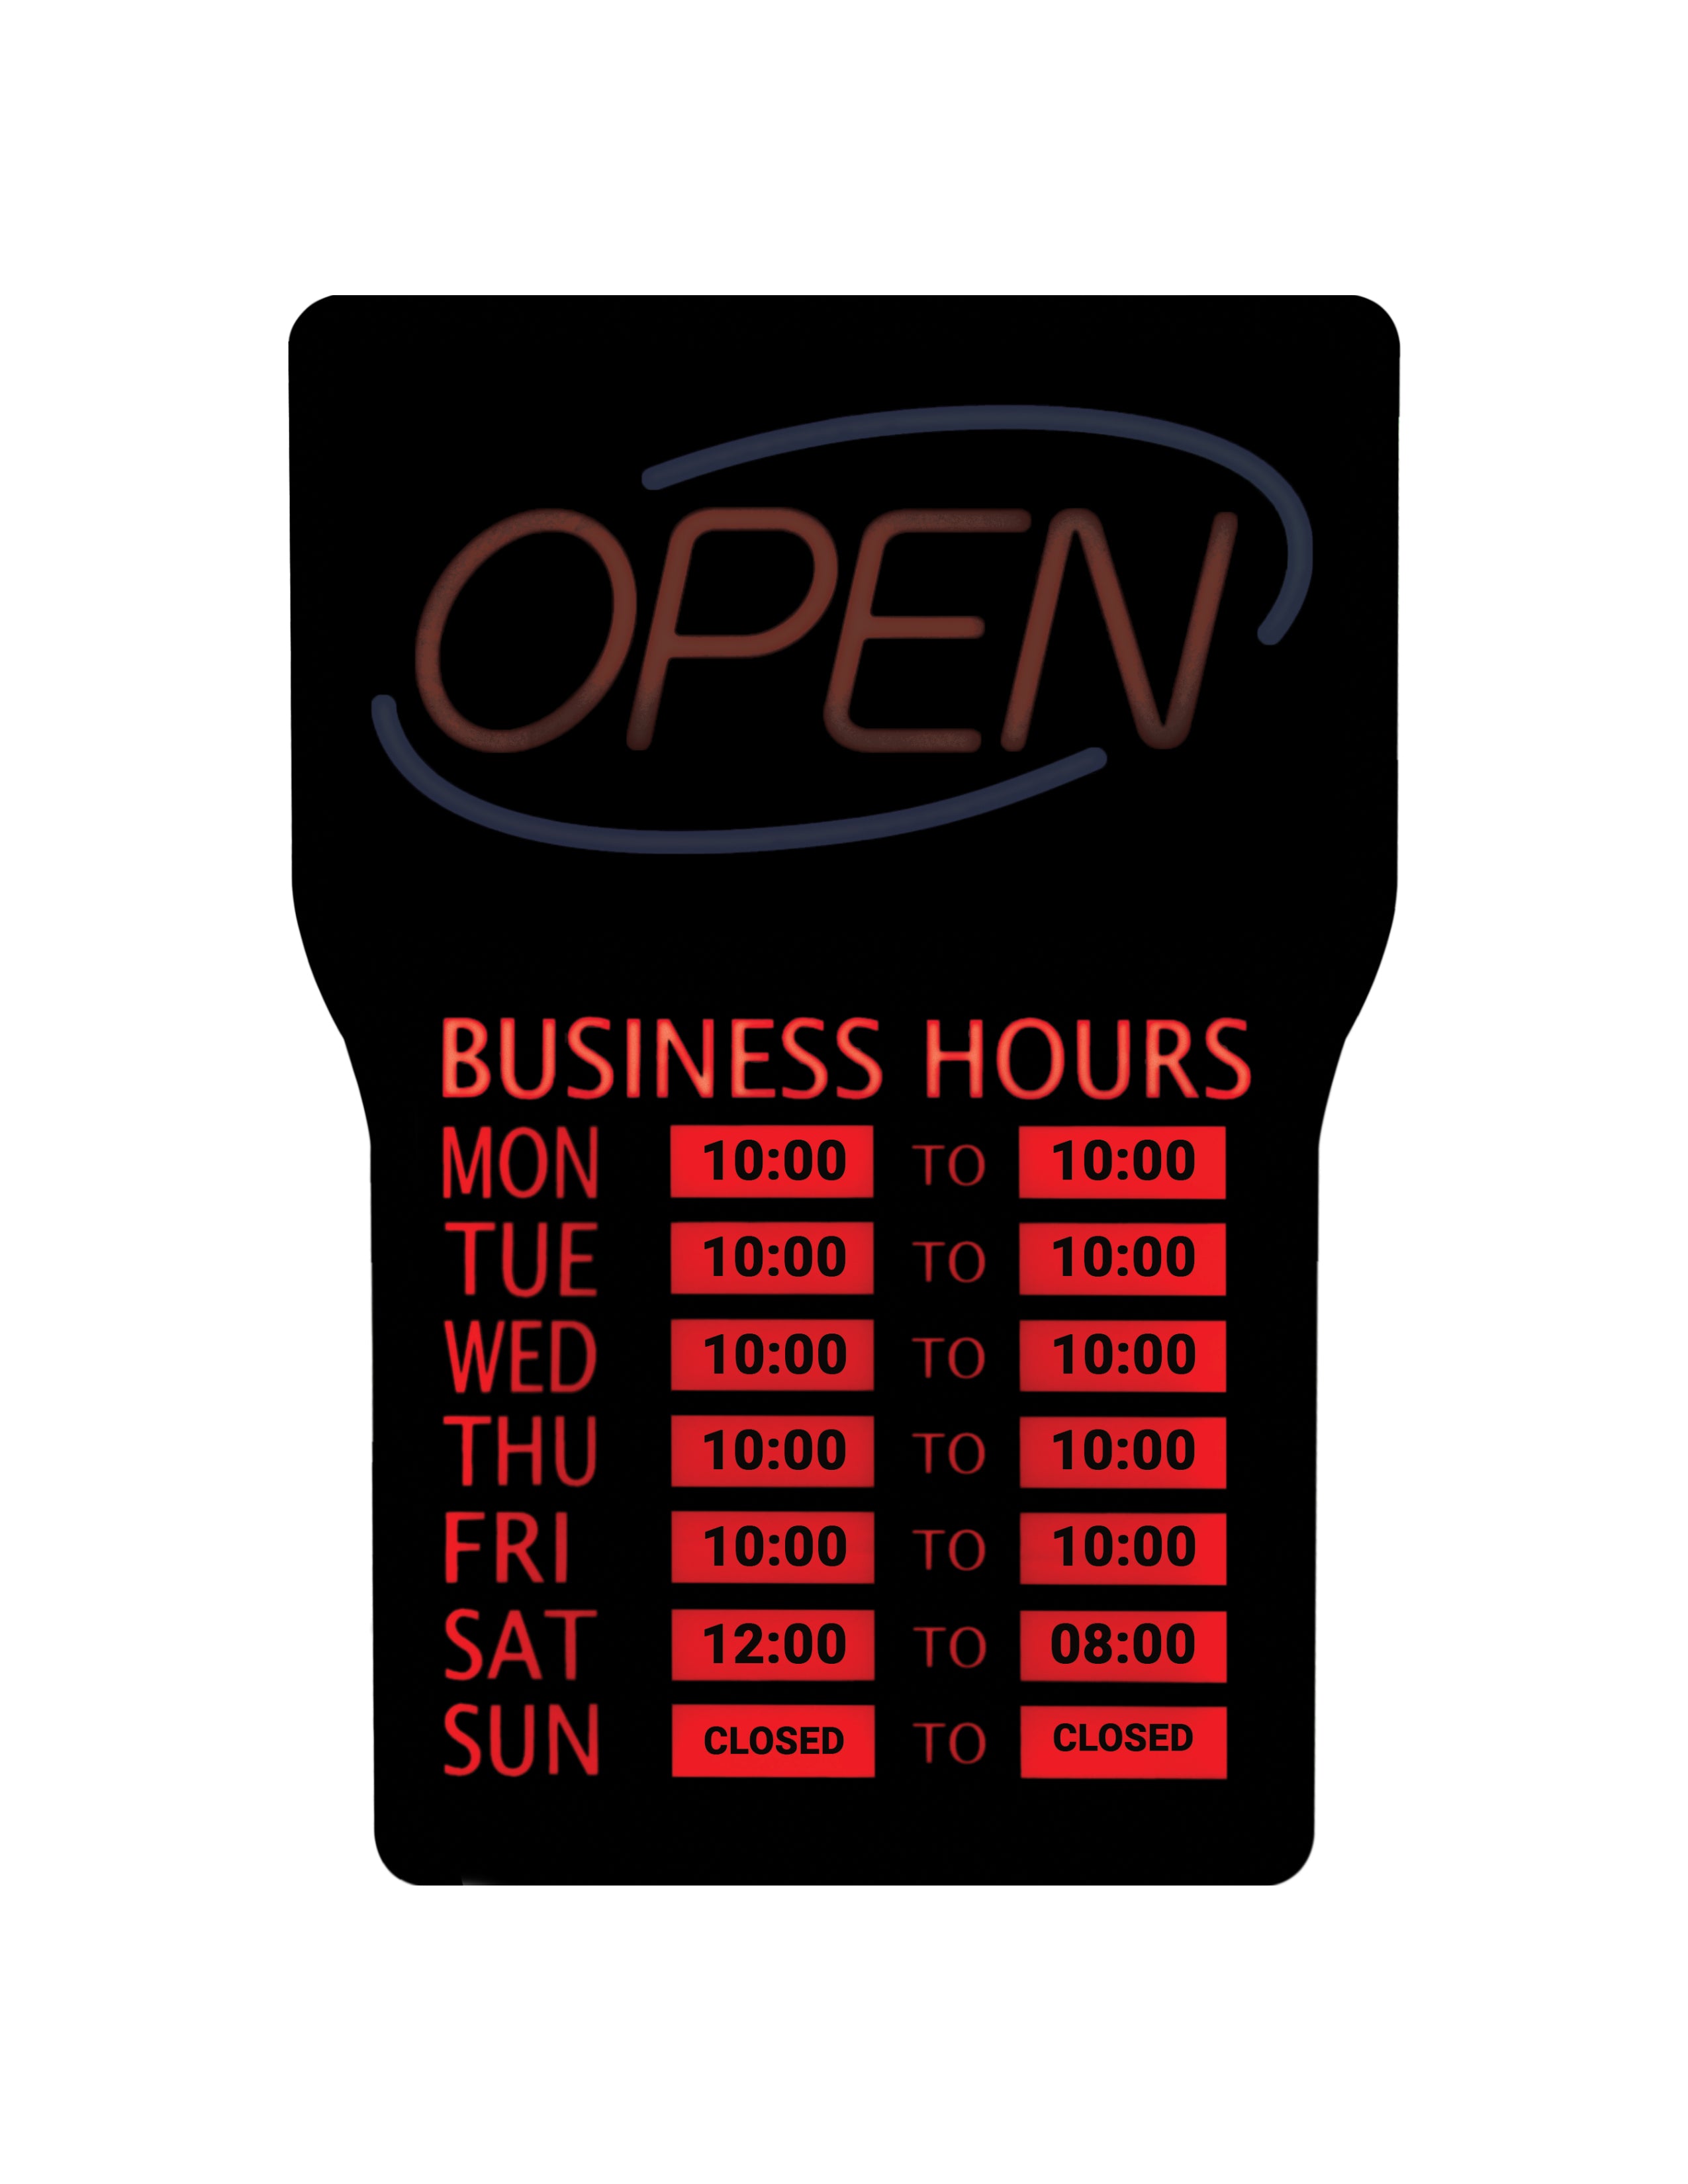 RSB-1342E/ LED OPEN SIGN WITH HOURS